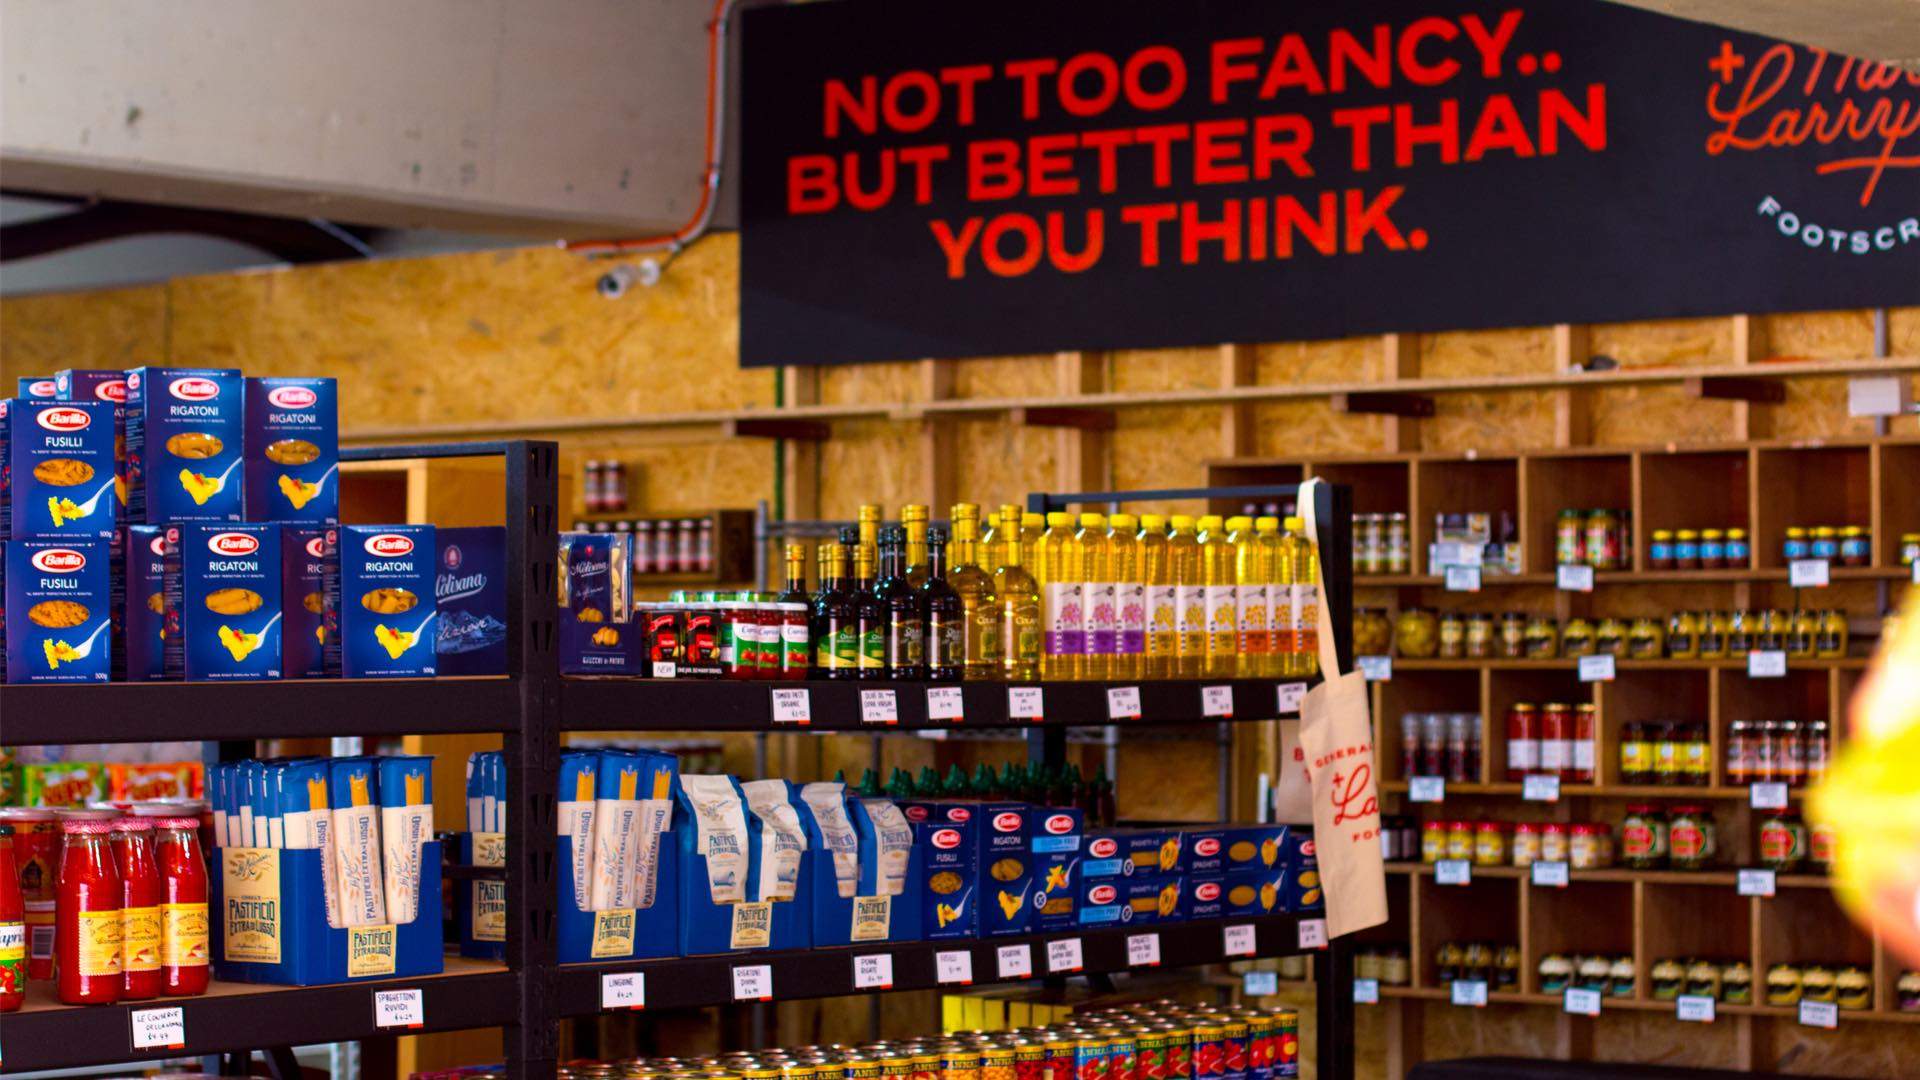 Harry and Larry's Is Footscray's Fun New General Store from the Mind Behind Laneway Festival